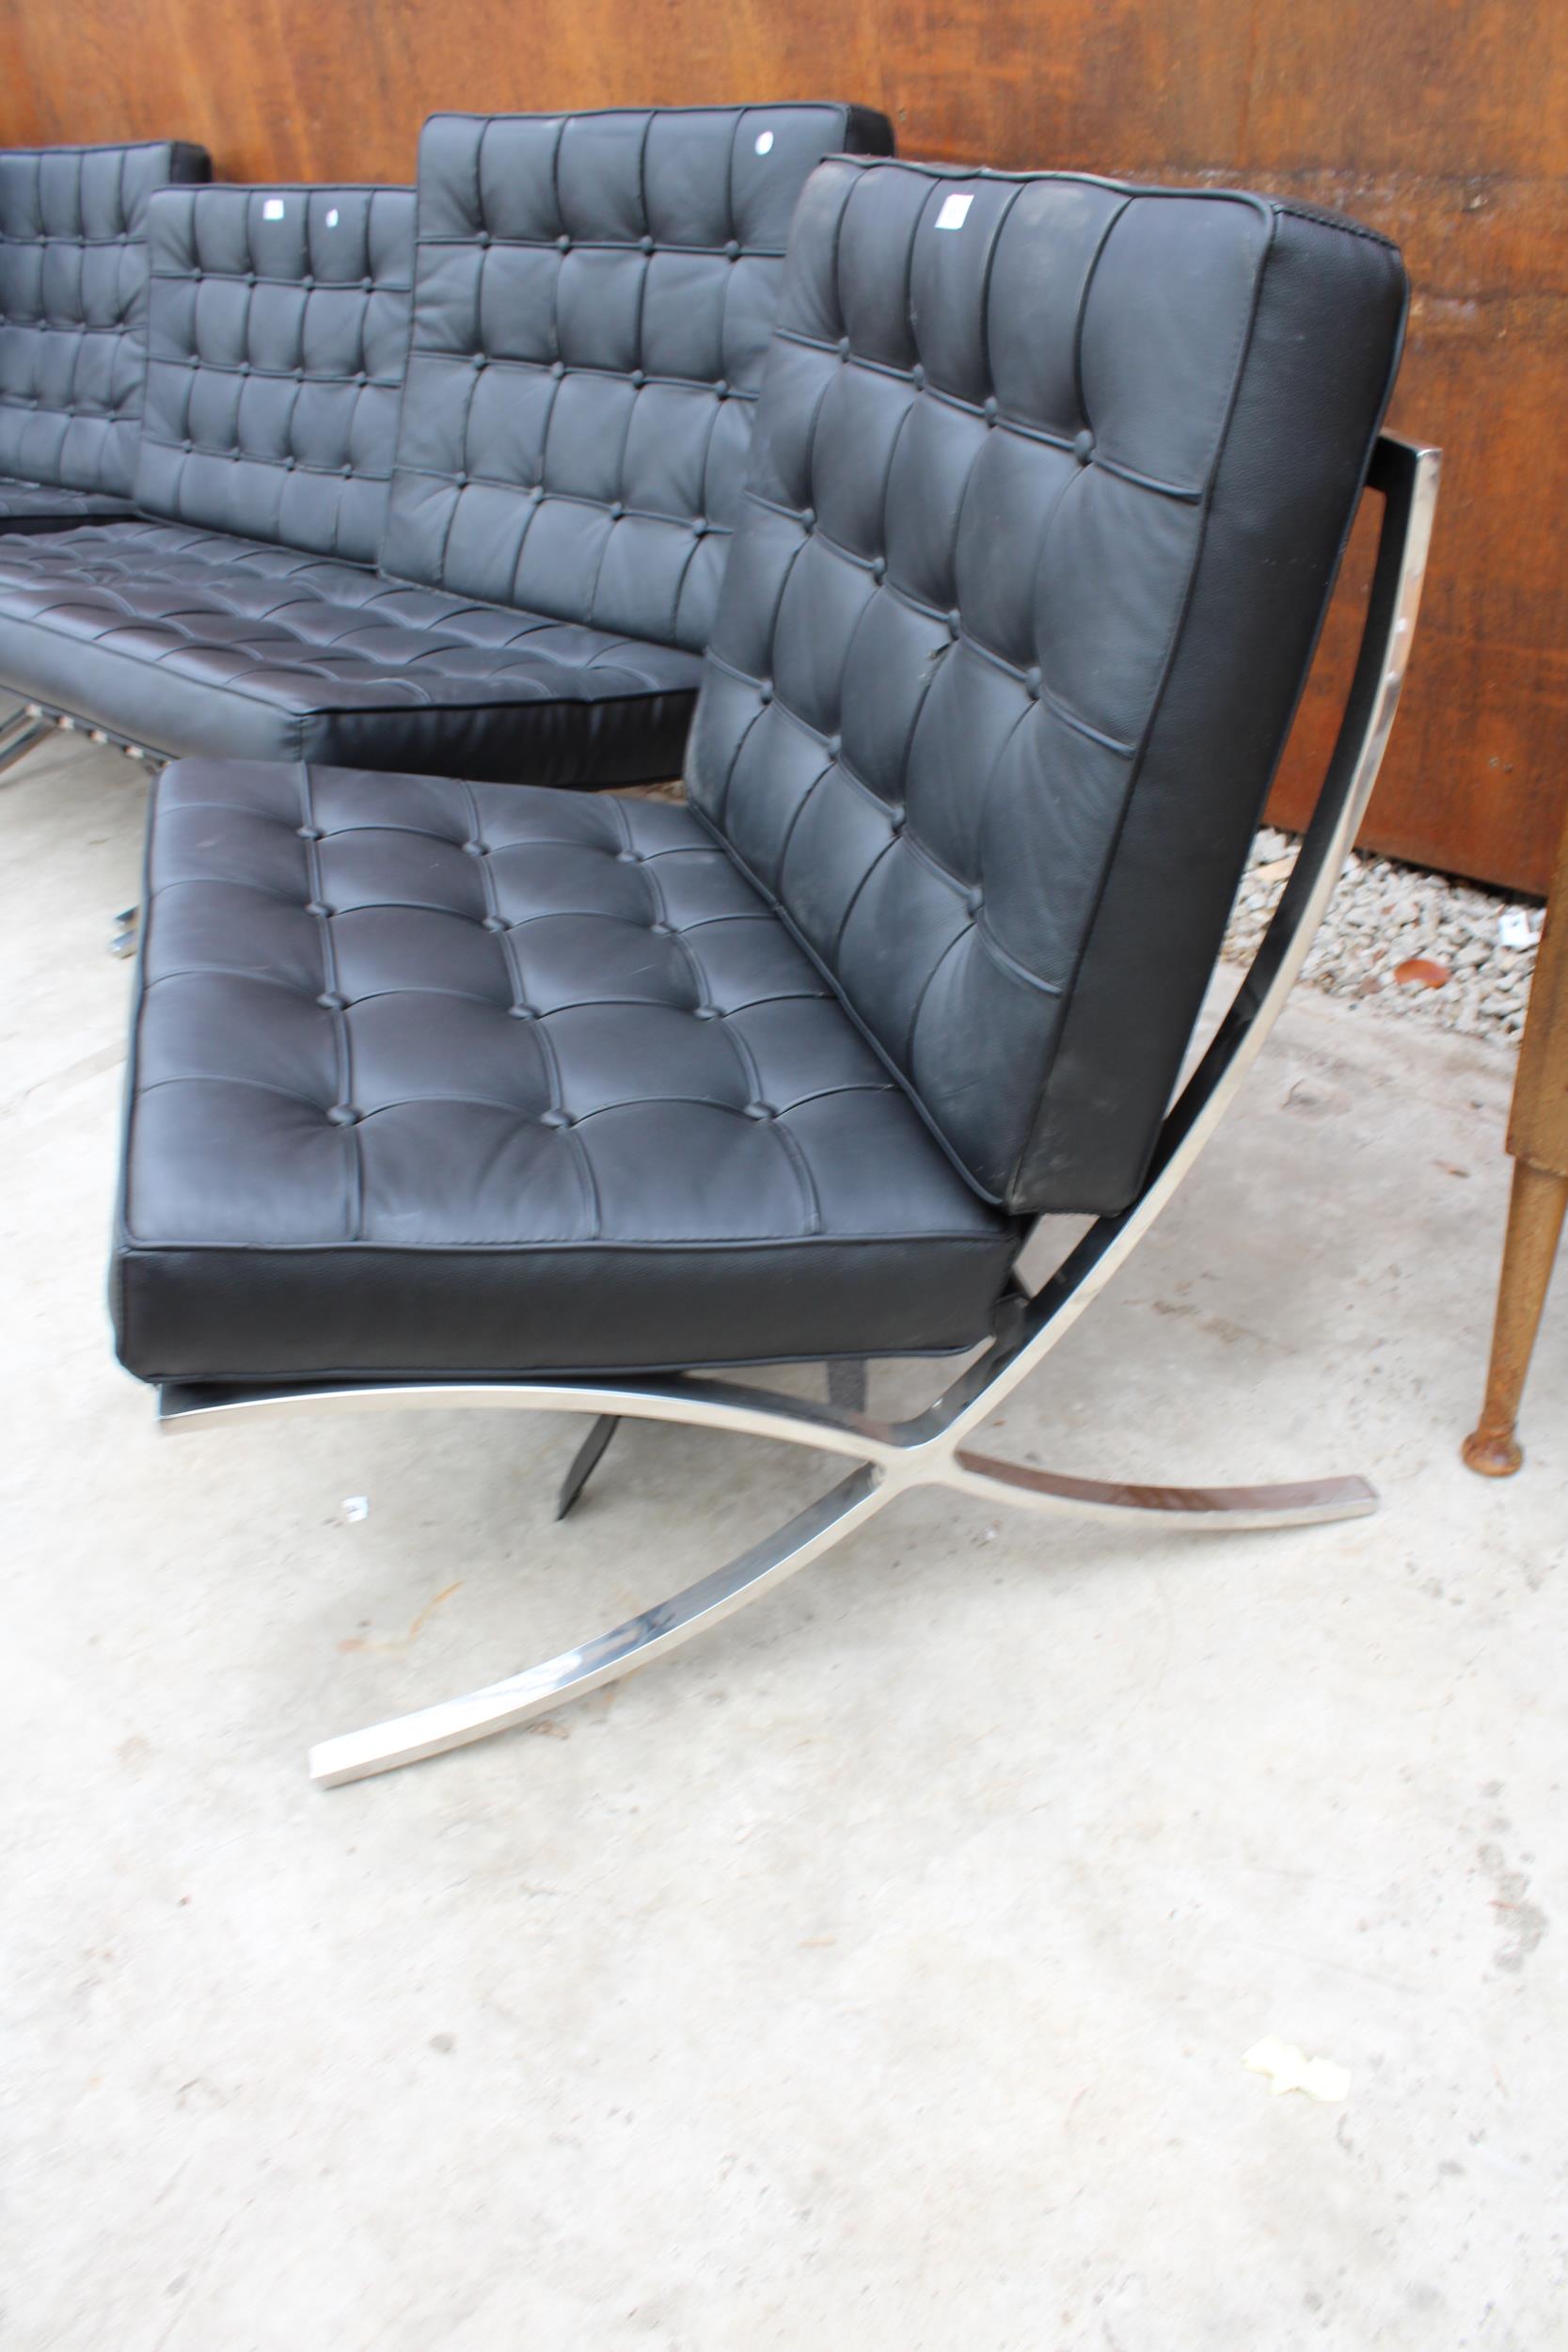 A PAIR OF BLACK BARCELONA STYLE CHAIRS ON POLISHED CHROME X FRAME LEGS - Image 2 of 4